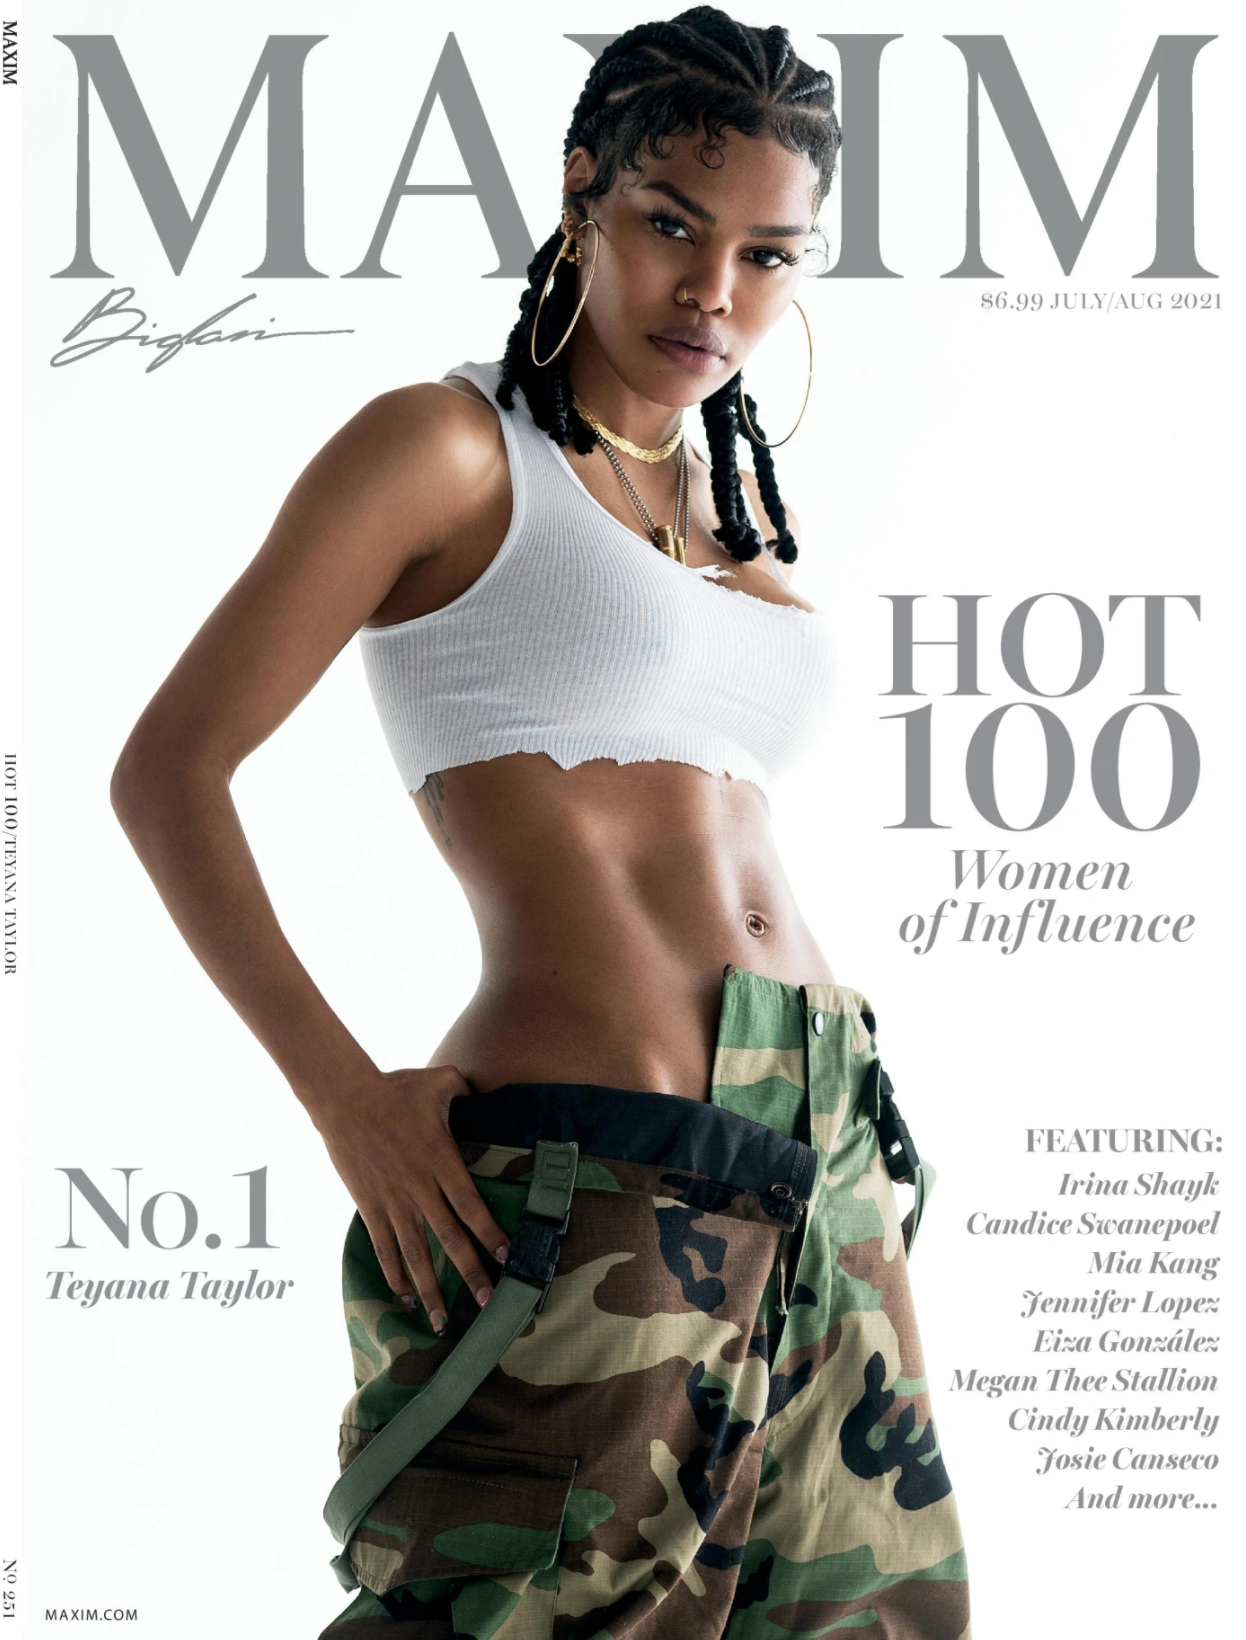 Teyana Taylor Is The First Black Woman To Be Named Maxim's Sexiest